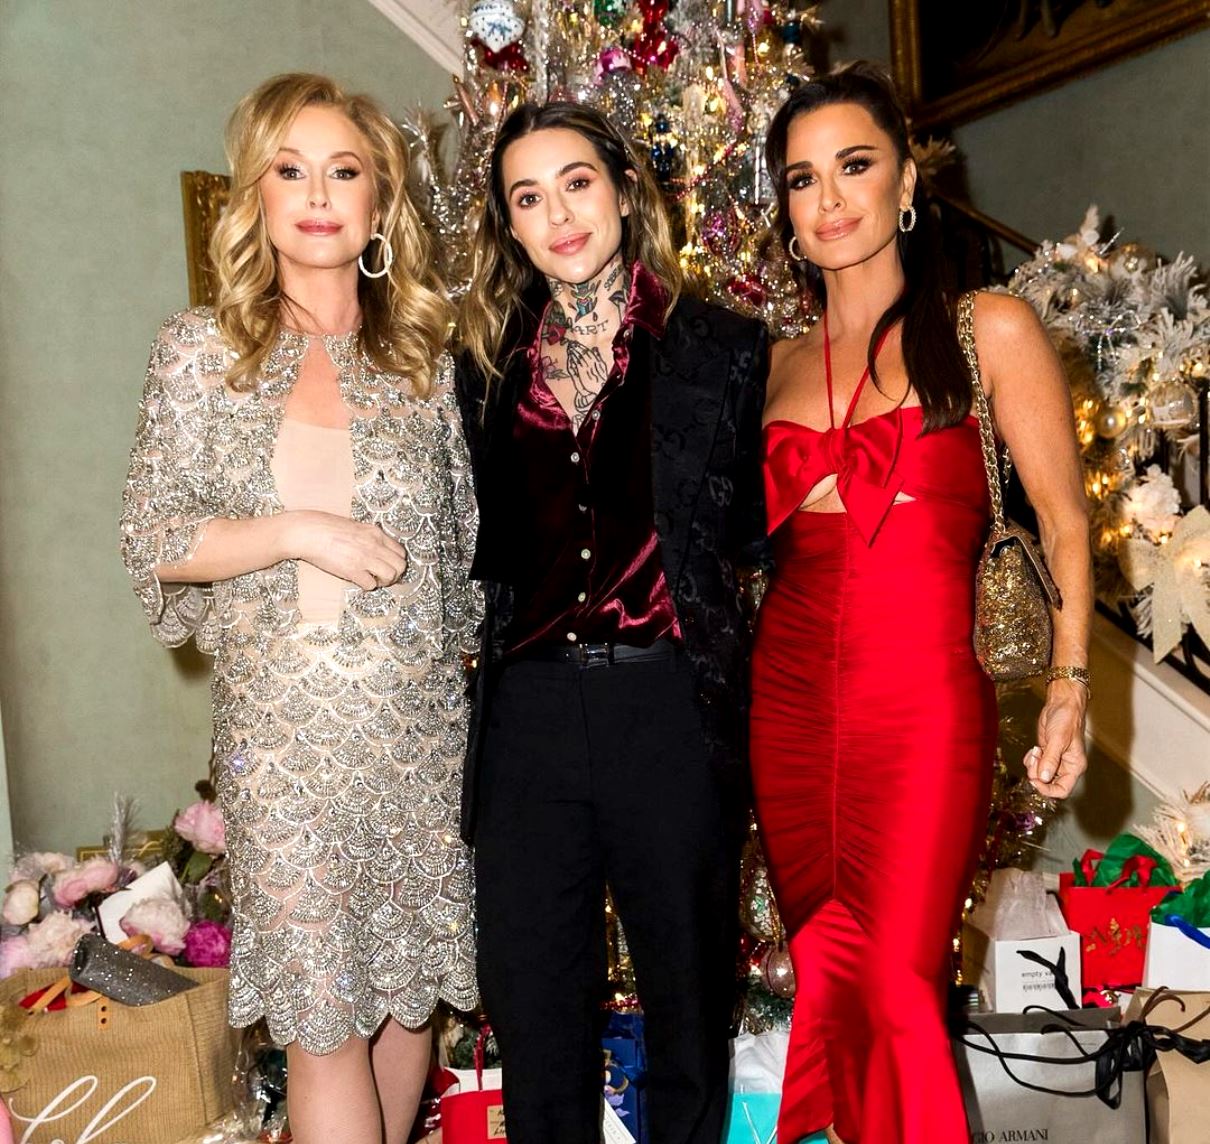 PHOTOS: RHOBH's Kyle Richards Attends Kathy Hilton's Party With Morgan Wade as She Explains Why Friendship With Singer is "Very Different"